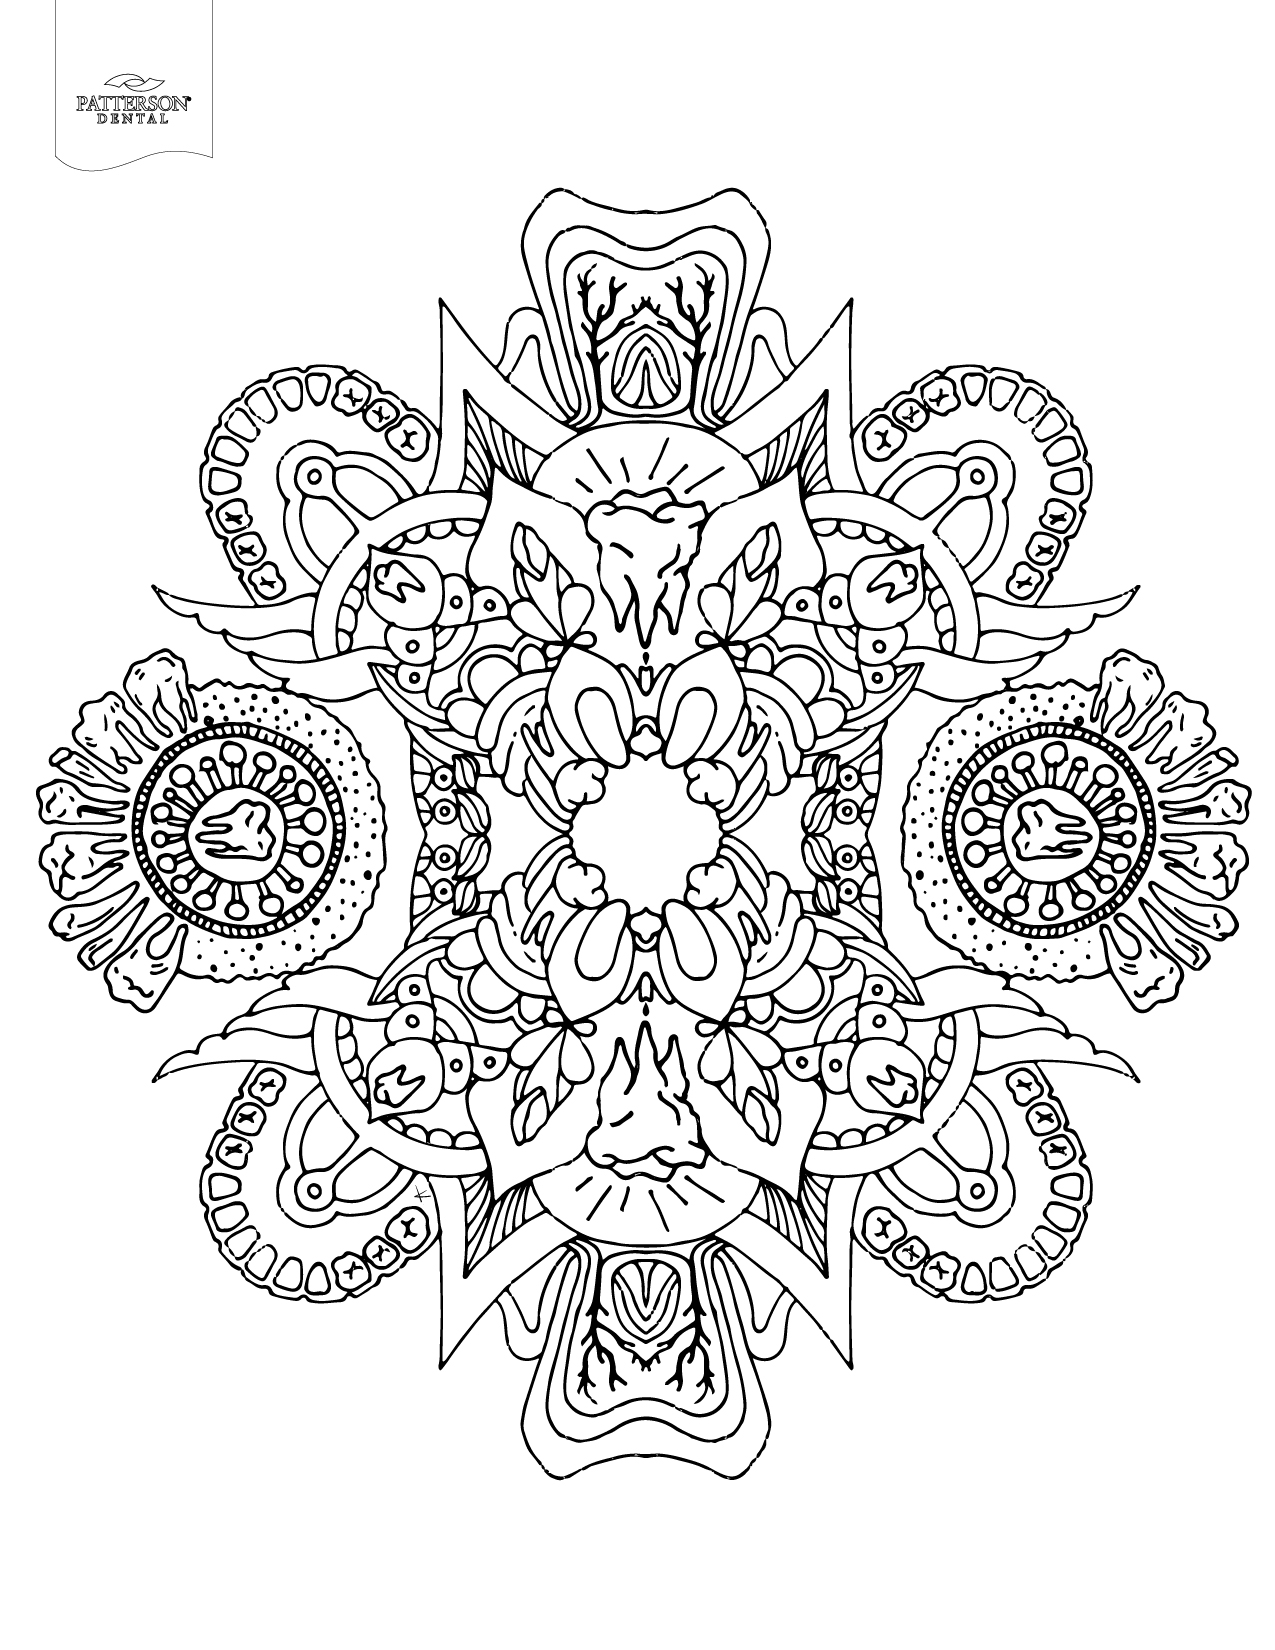 Full Size Coloring Pages To Print For Adults